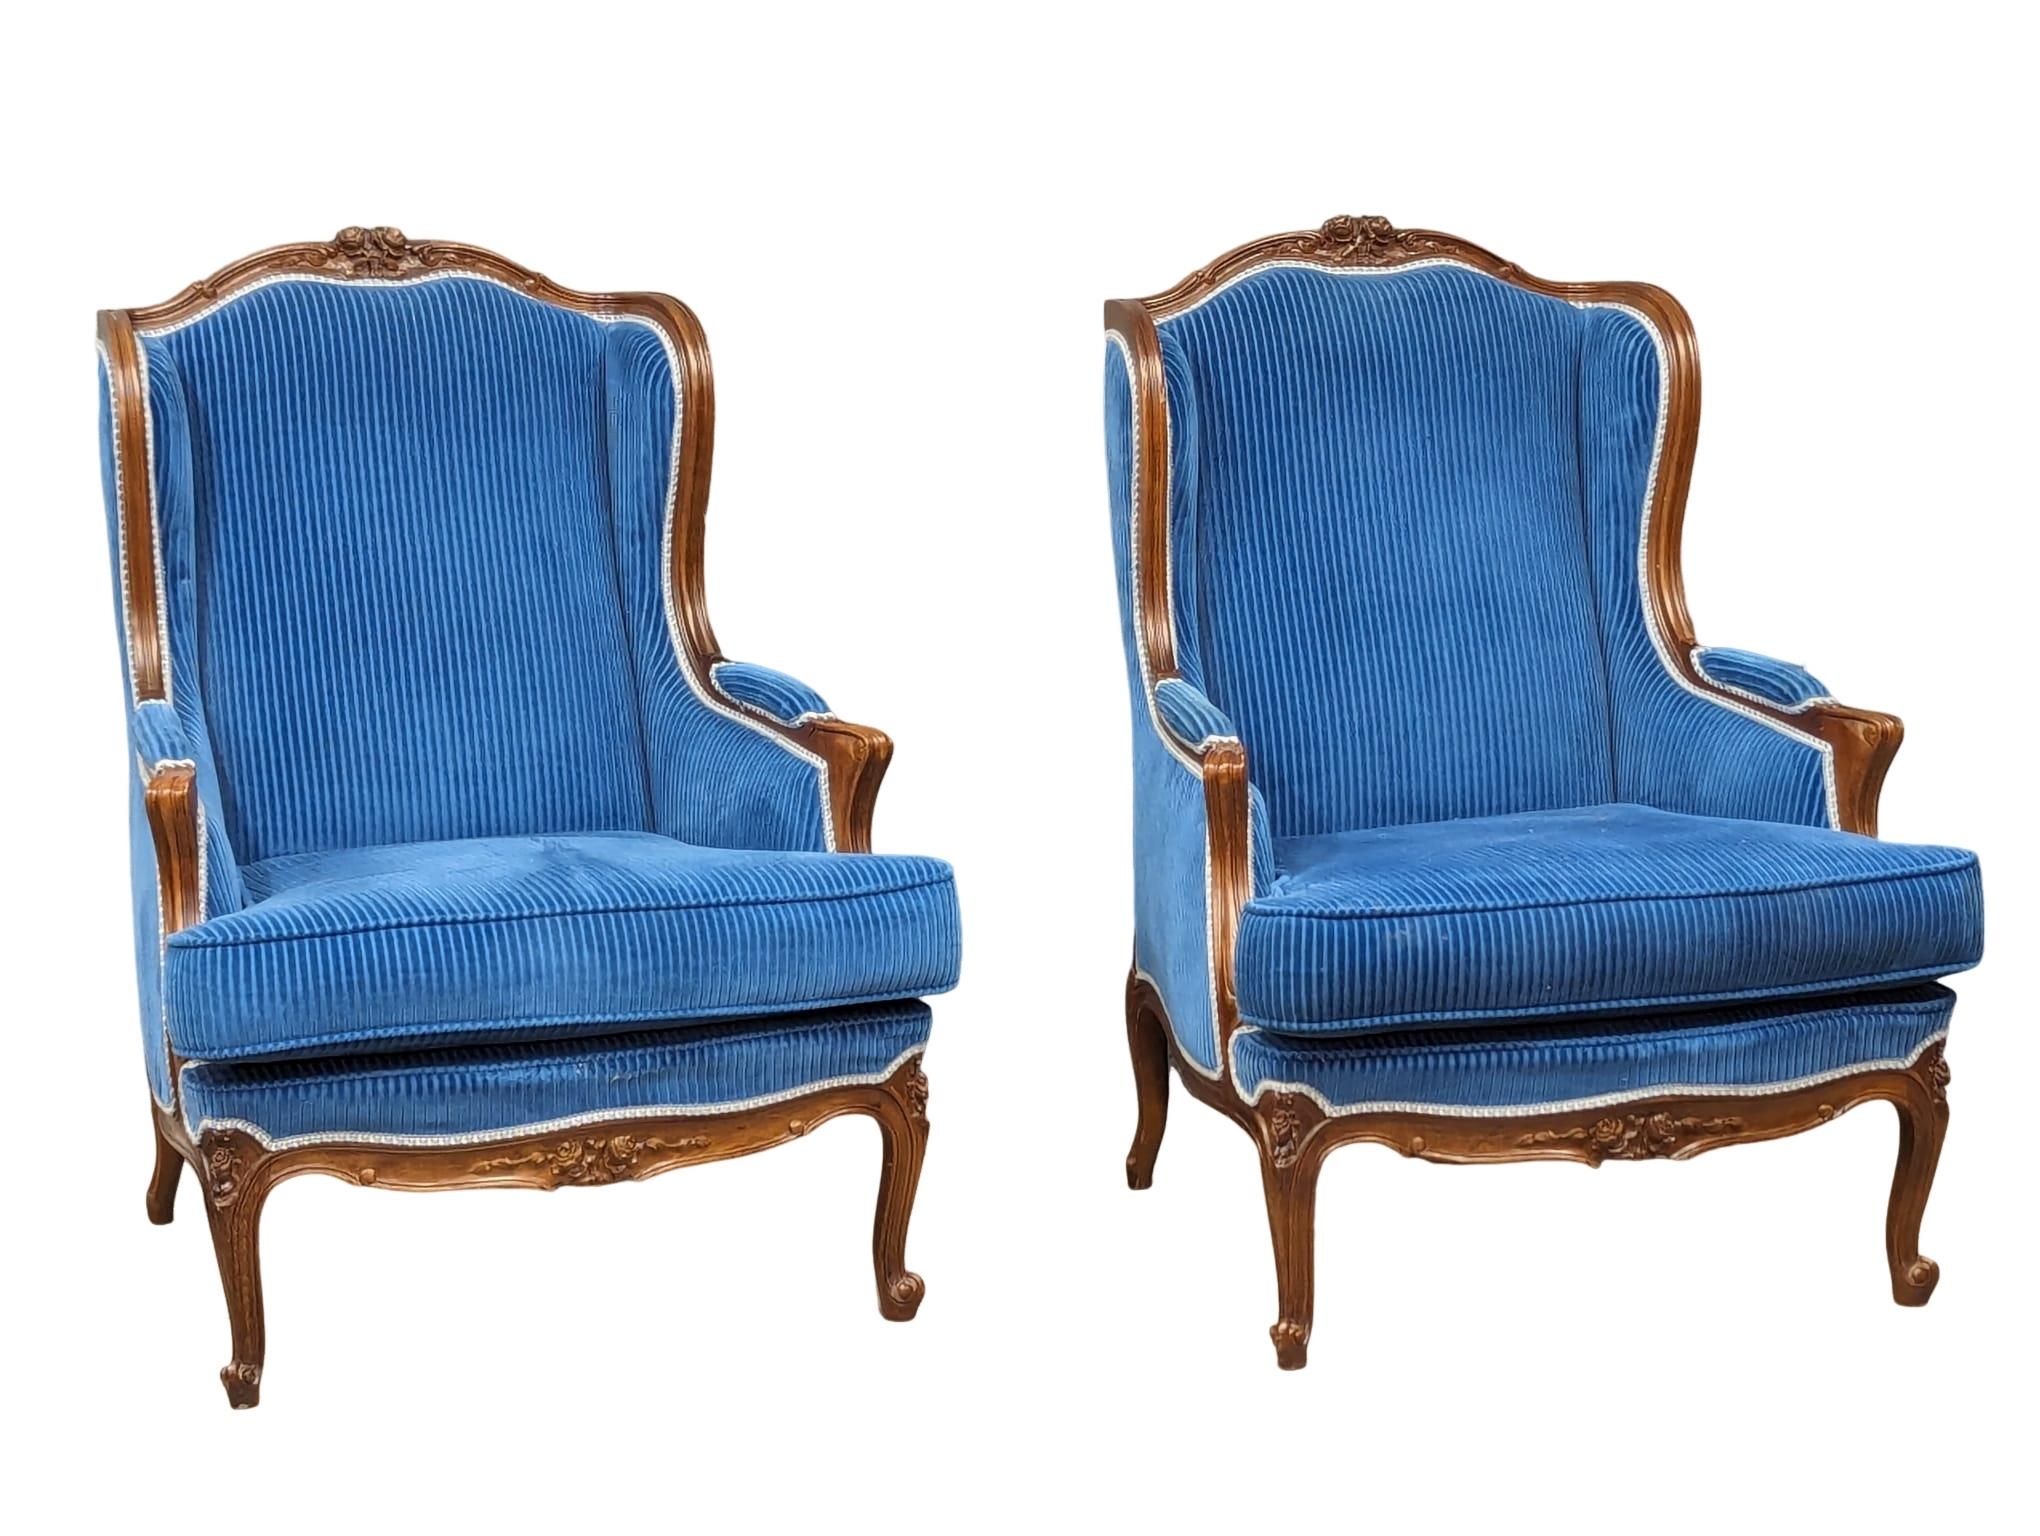 A pair of large ornate French Provincial style armchairs.